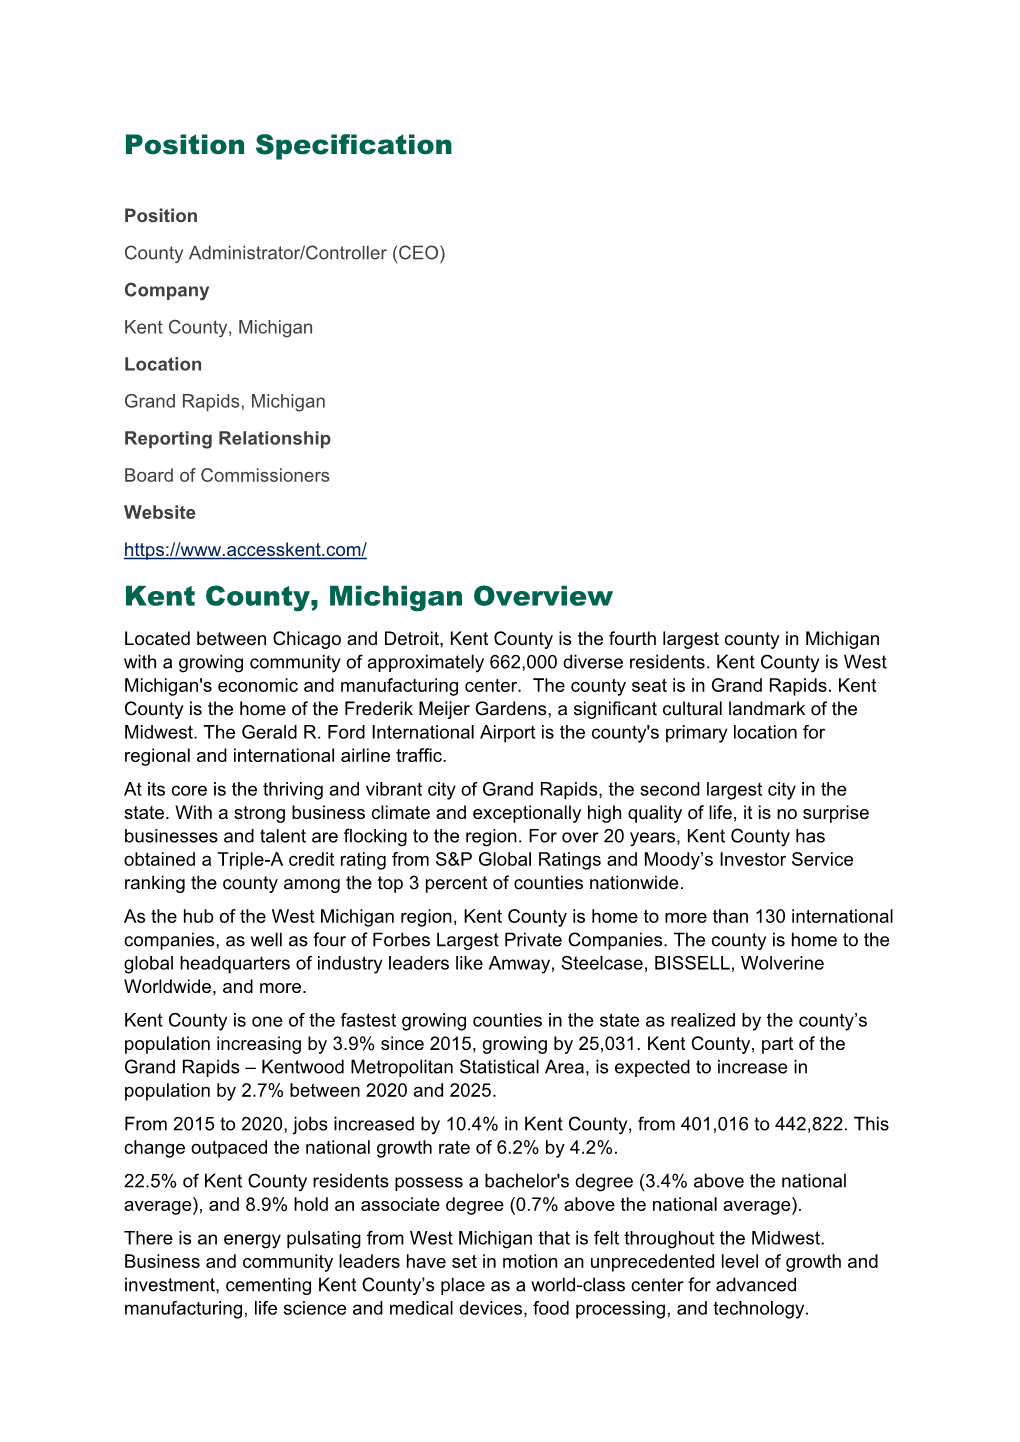 Position Specification Kent County, Michigan Overview